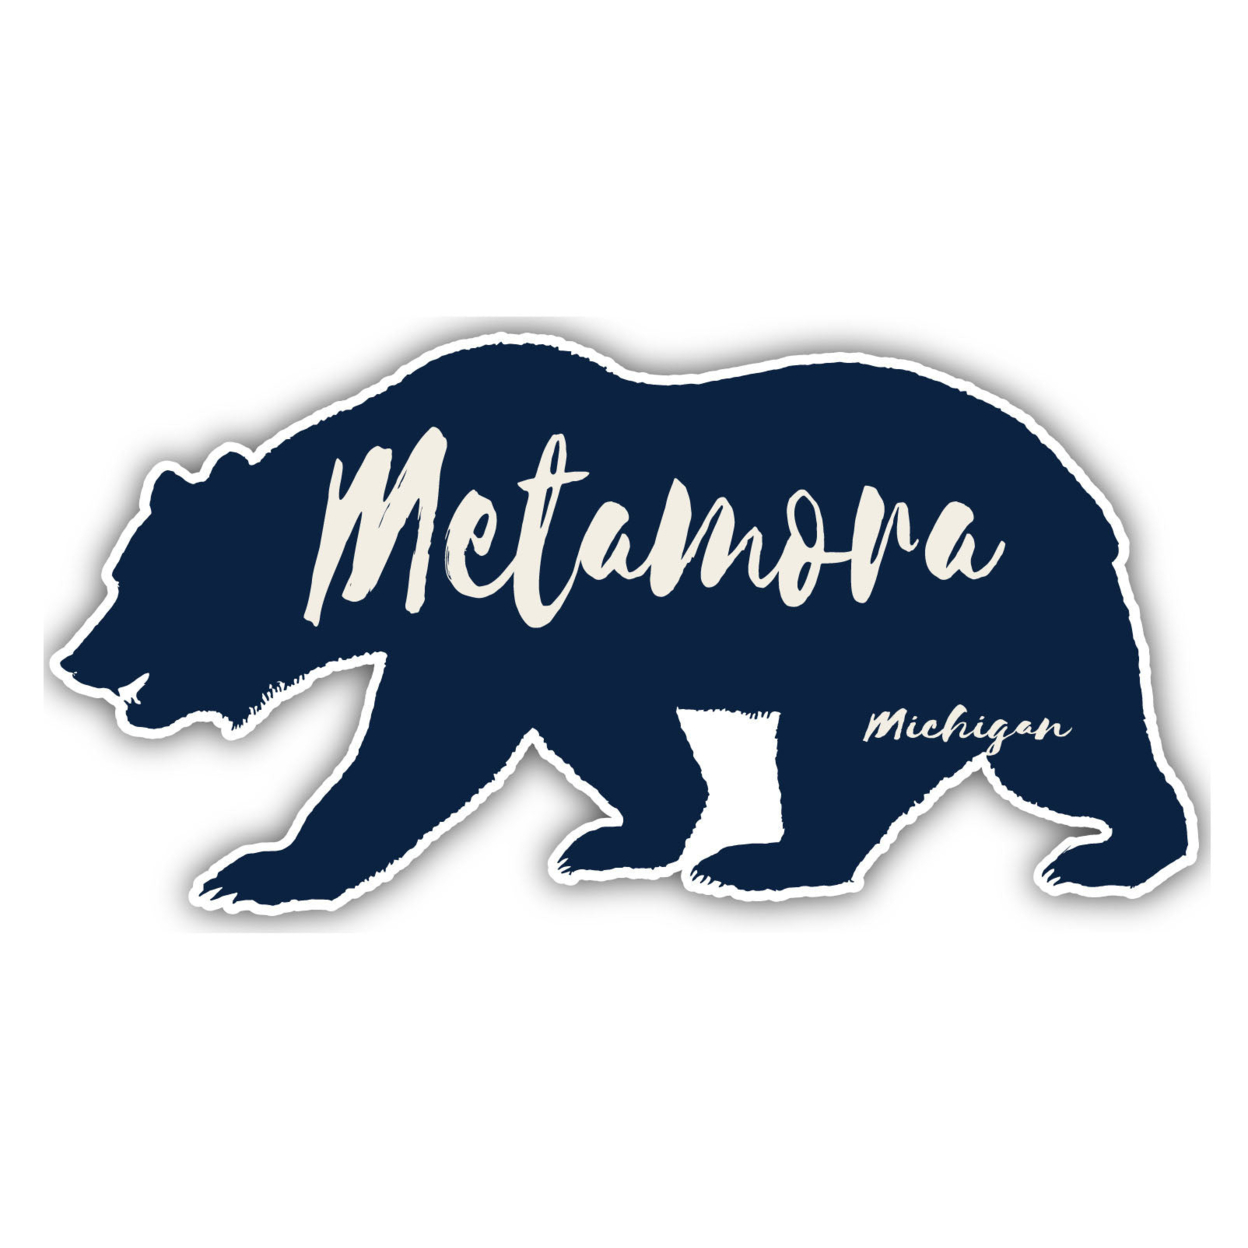 Metamora Michigan Souvenir Decorative Stickers (Choose Theme And Size) - 4-Inch, Great Outdoors